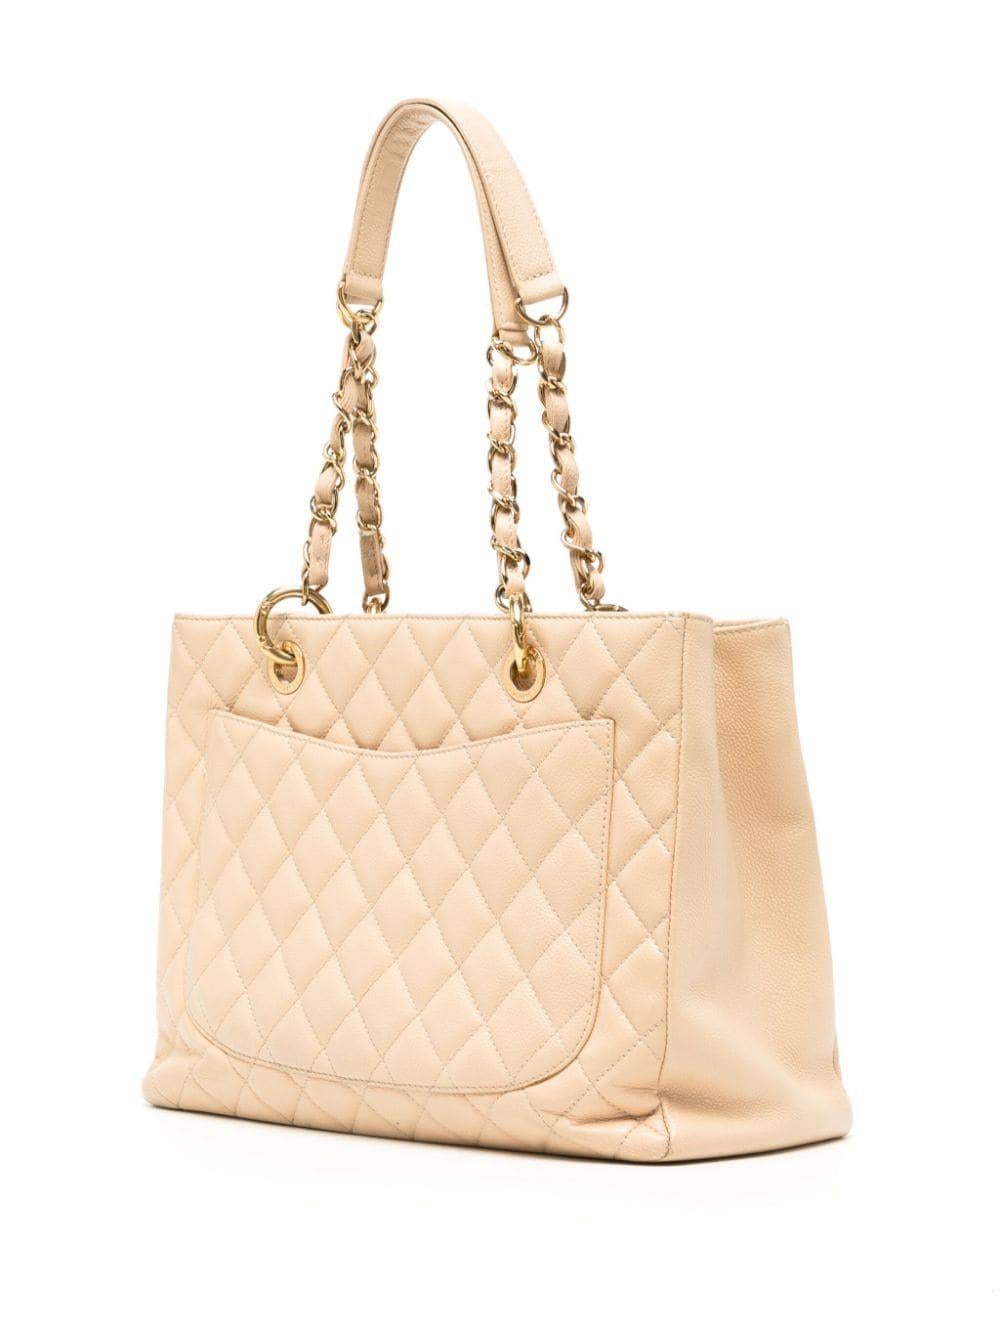 The highly treasured CHANEL Grand Shopping tote bag was discontinued in 2015. This particular version, designed in 2011, features the signature diamond quilting in timeless beige caviar leather.
 
* circa 2011
* light beige
* caviar leather
*